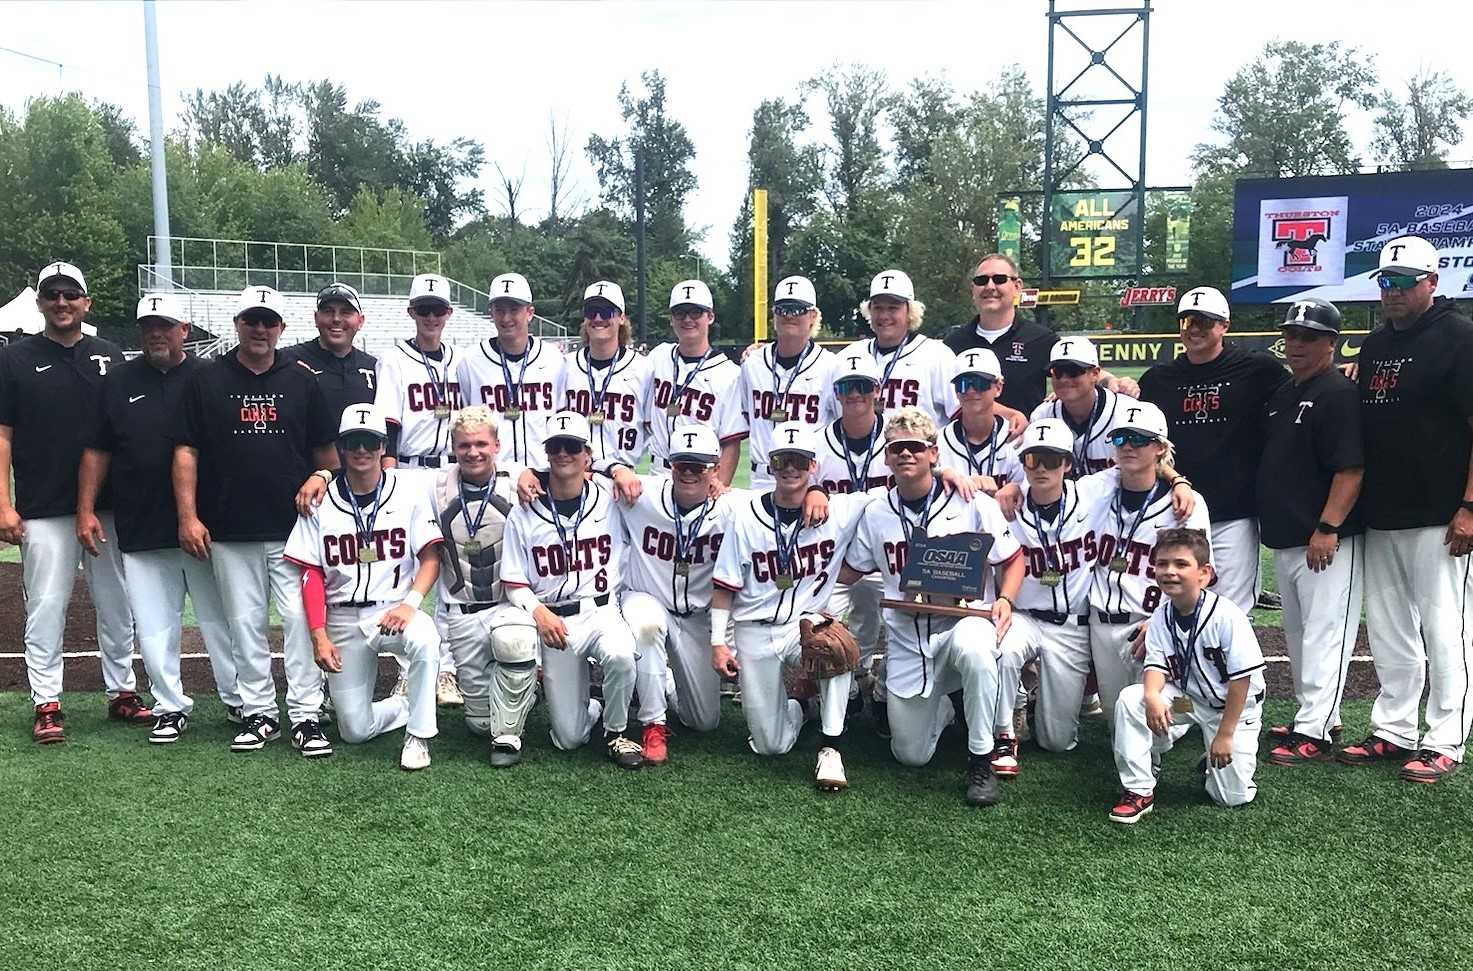 Thurston repeated as 5A baseball champion Saturday with a 2-0 win over West Albany at PK Park.